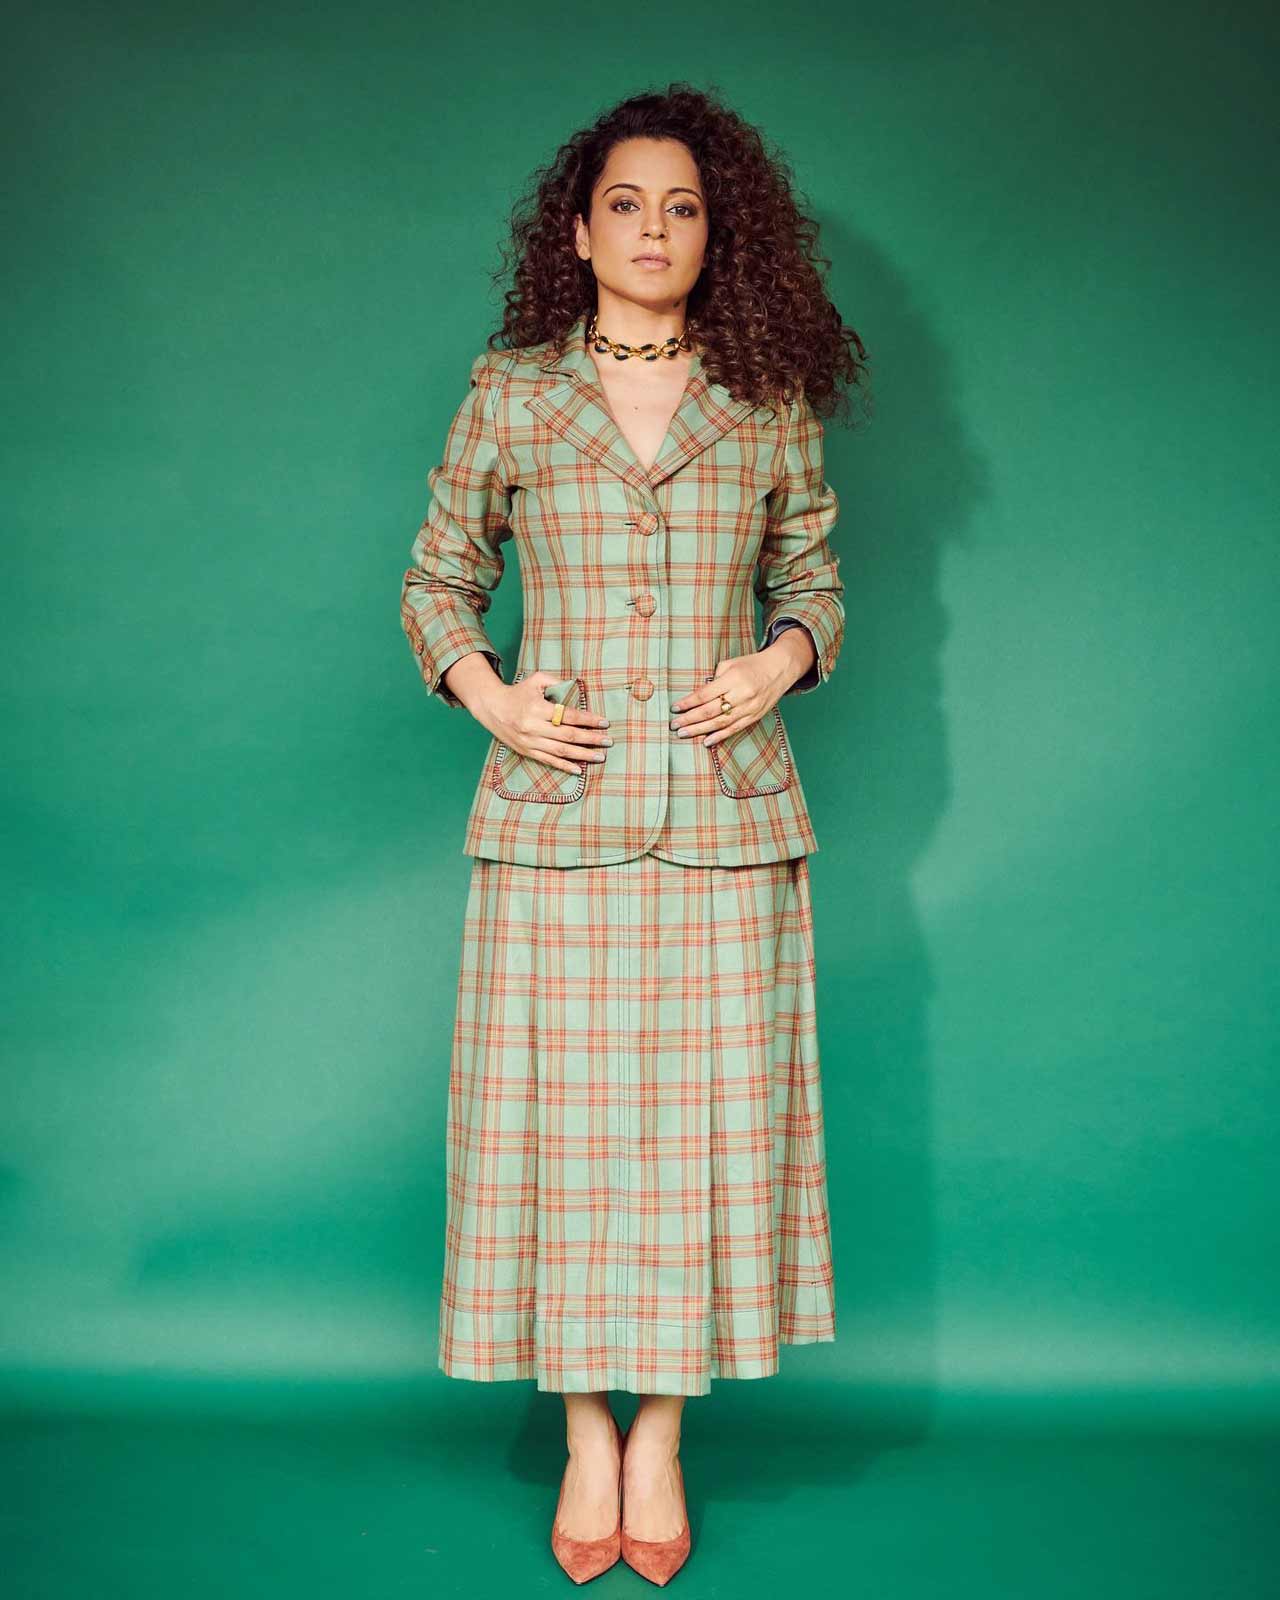 Kangana Ranaut's love for classy formals comes out prominently in this one! A retro checkered skirt suit, with her funky curls, minimal accessories, and tan coloured pumps will surely add an extra oomph factor to your work wardrobe.